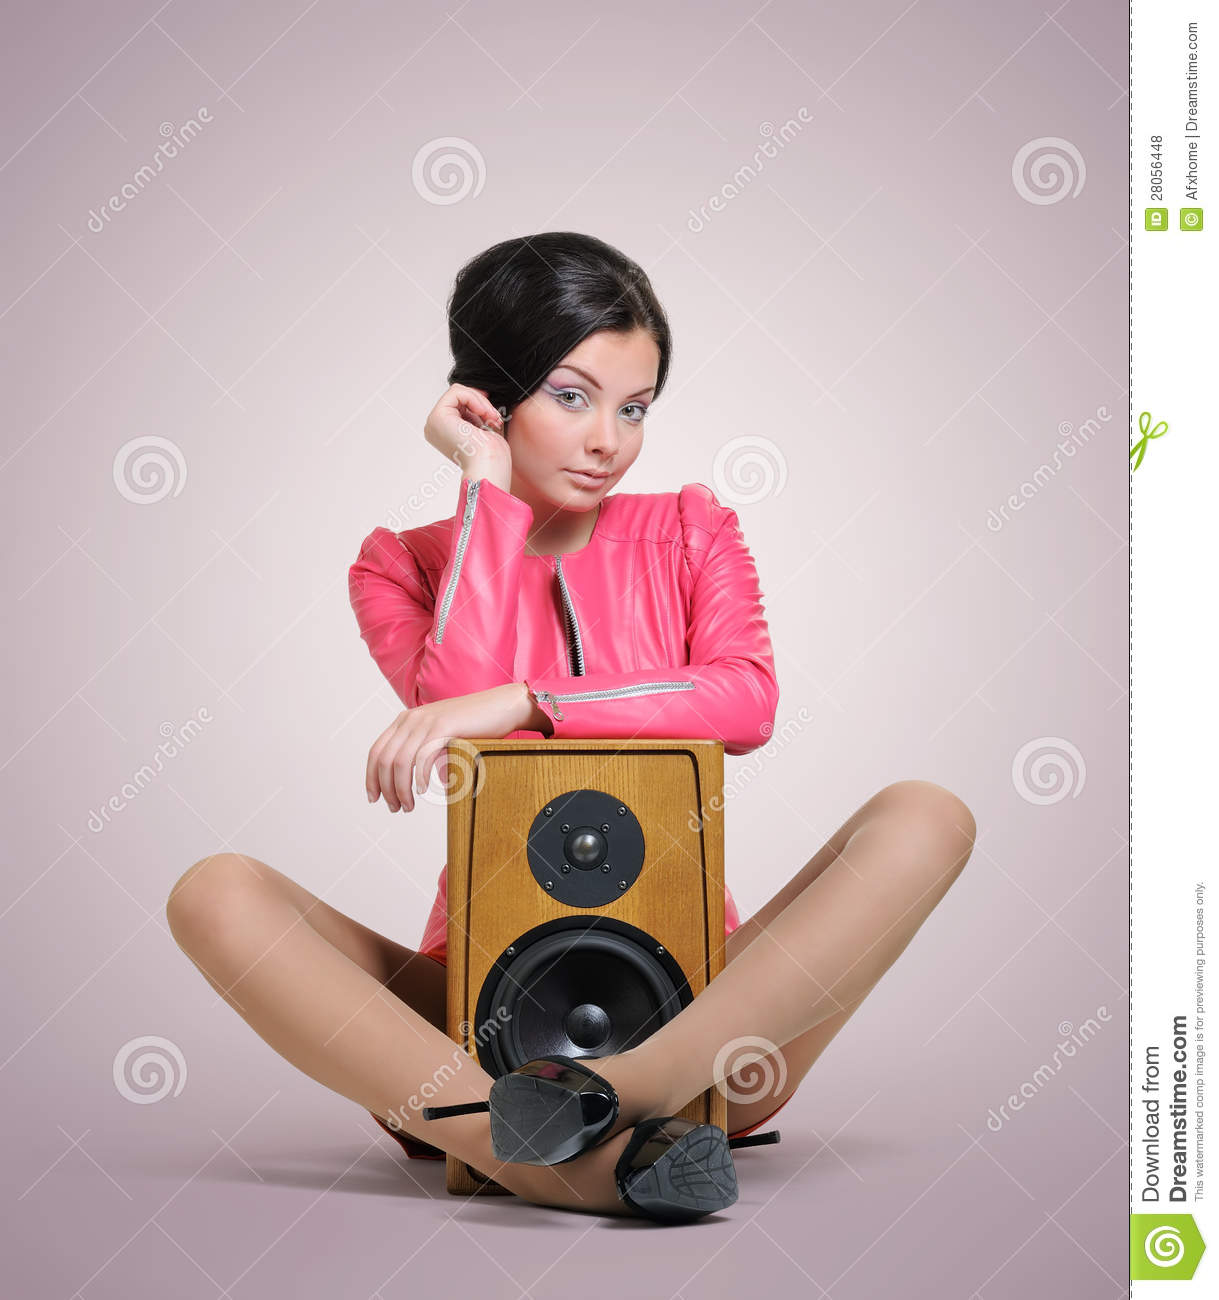 Elegant Young Woman With Speaker Royalty Free Stock Photos   Image